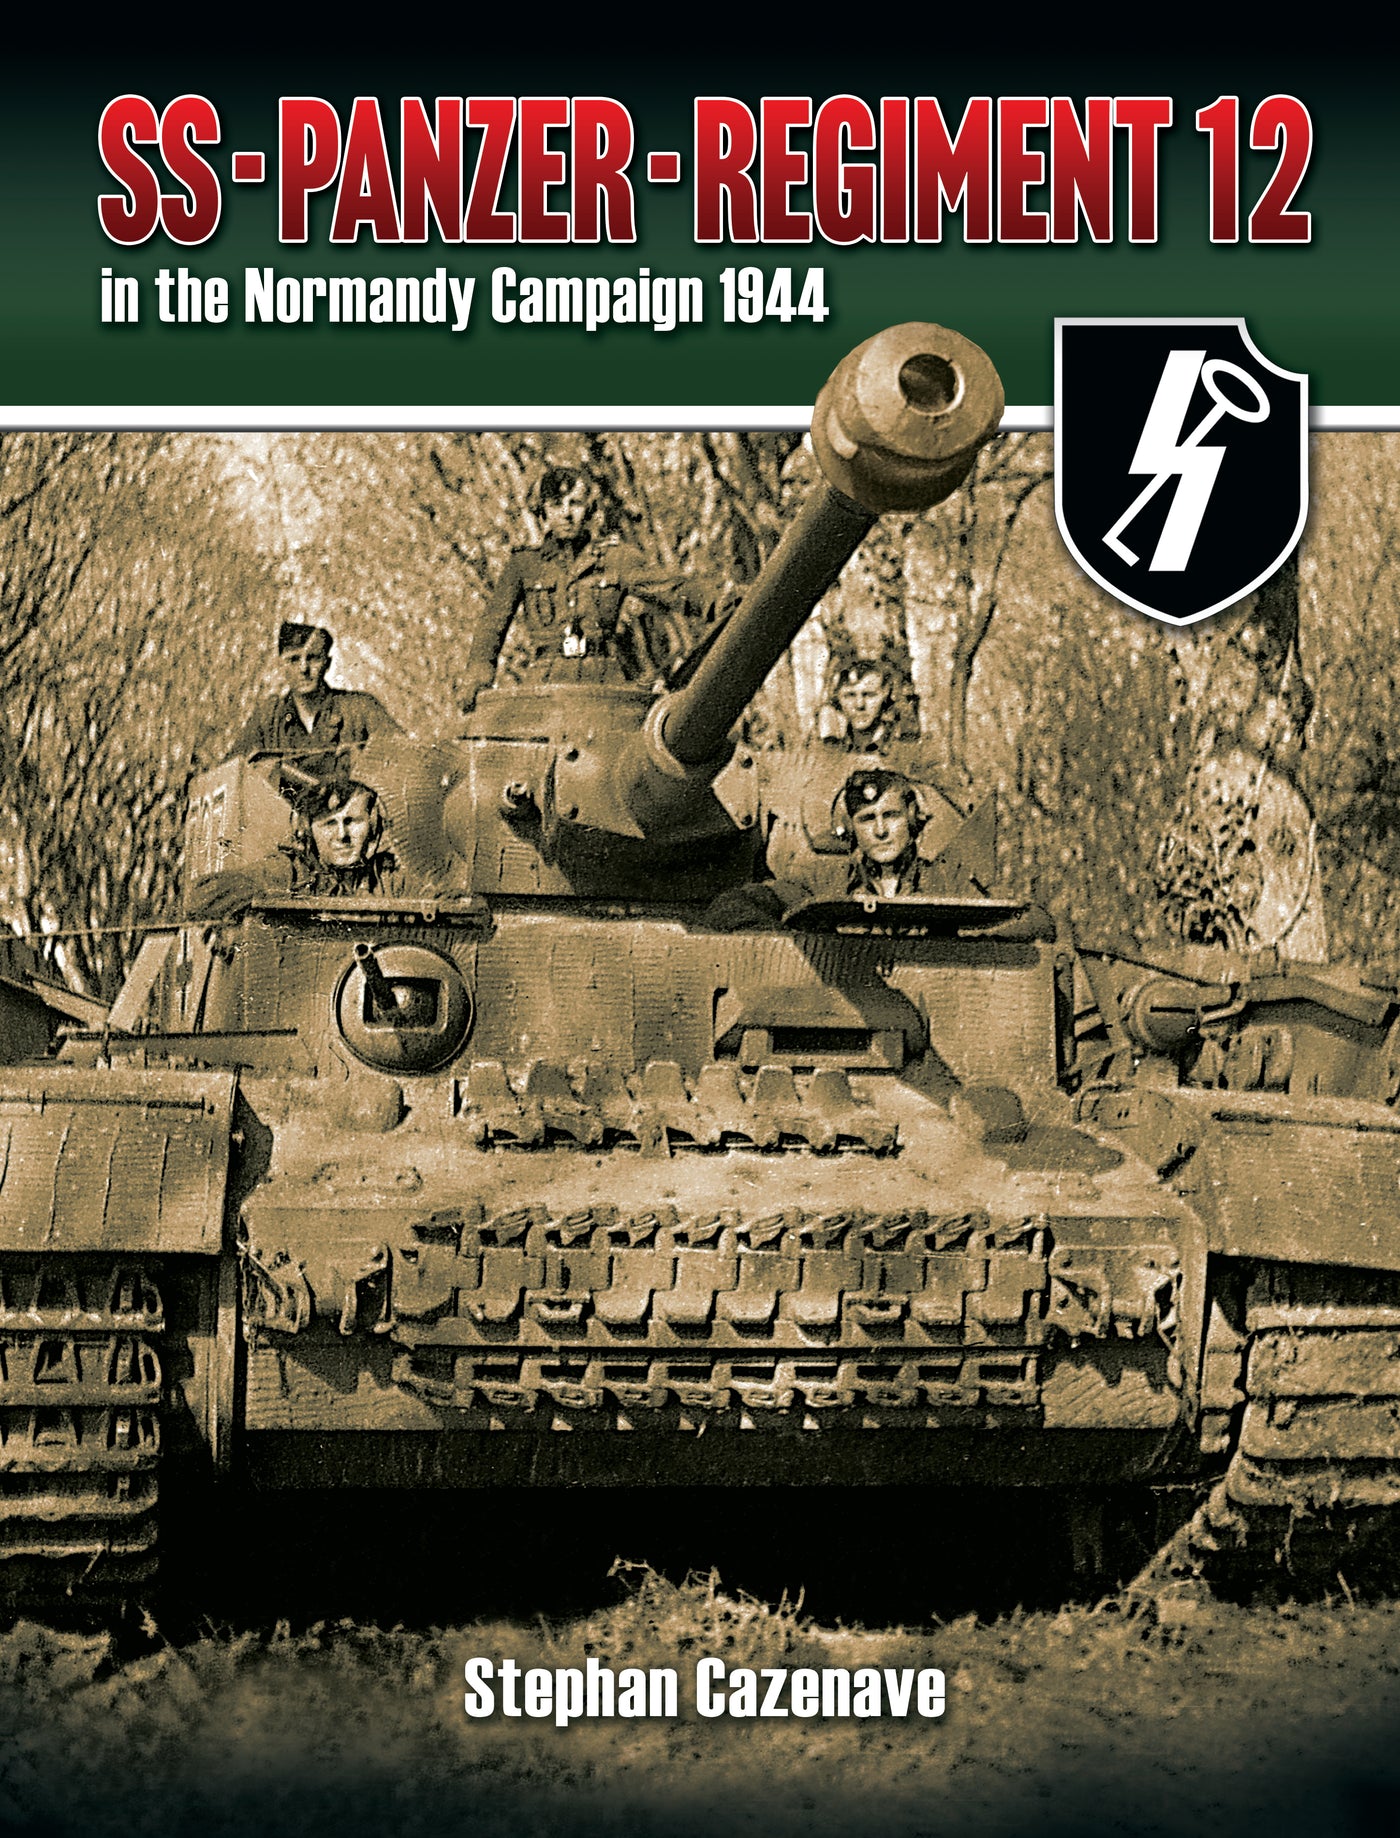 SS-PANZER-REGIMENT 12 in the Normandy Campaign 1944